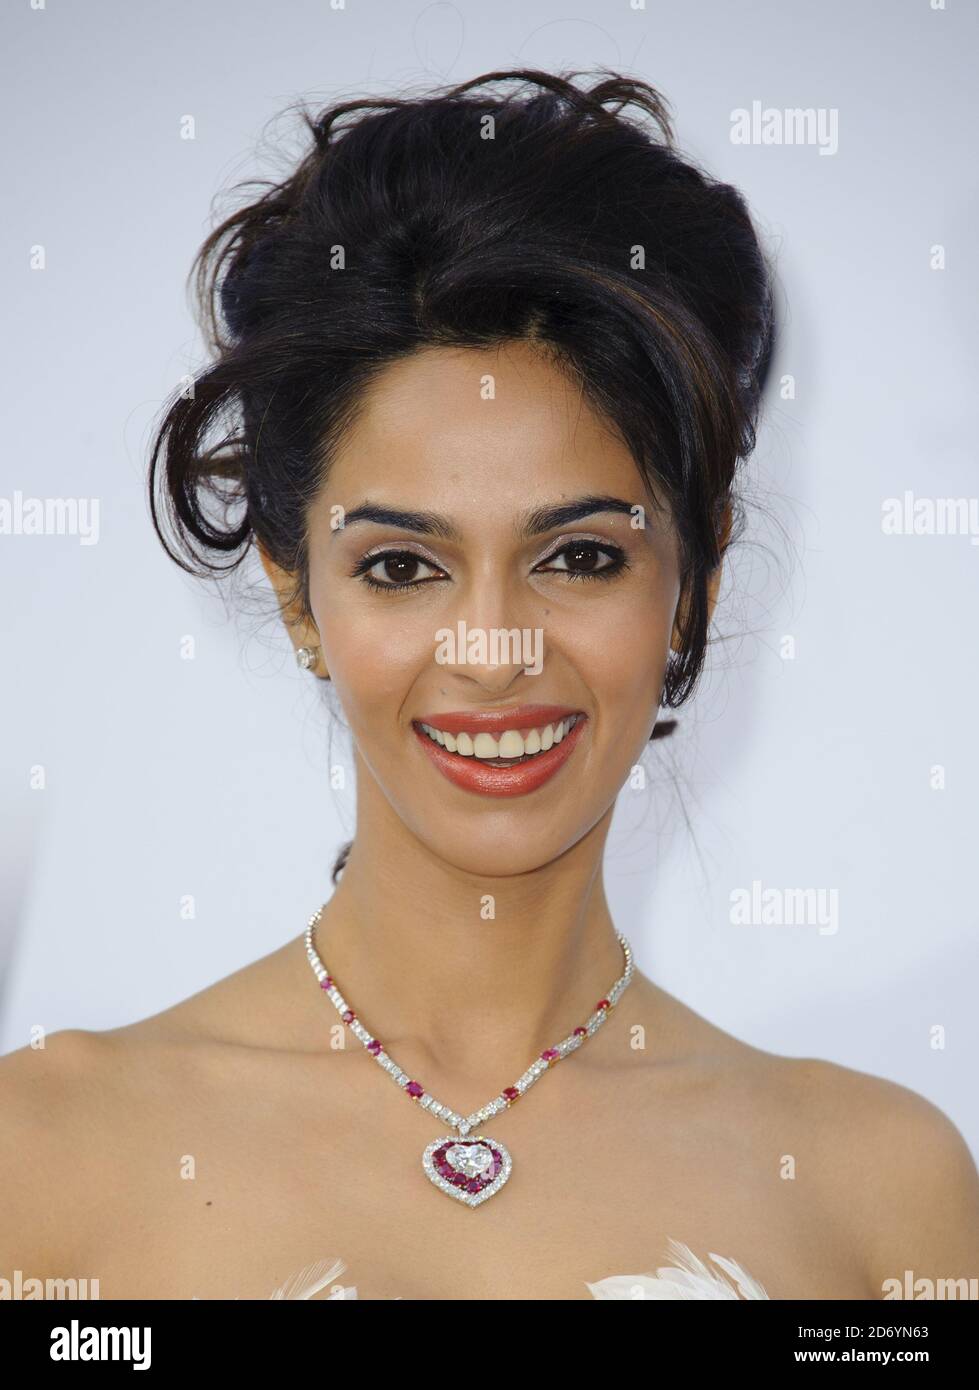 Mallika Sherawat arriving at the AmfAR Gala, during the 64th Cannes International Film Festival, at the Hotel du Cap, in Cannes, France. Stock Photo